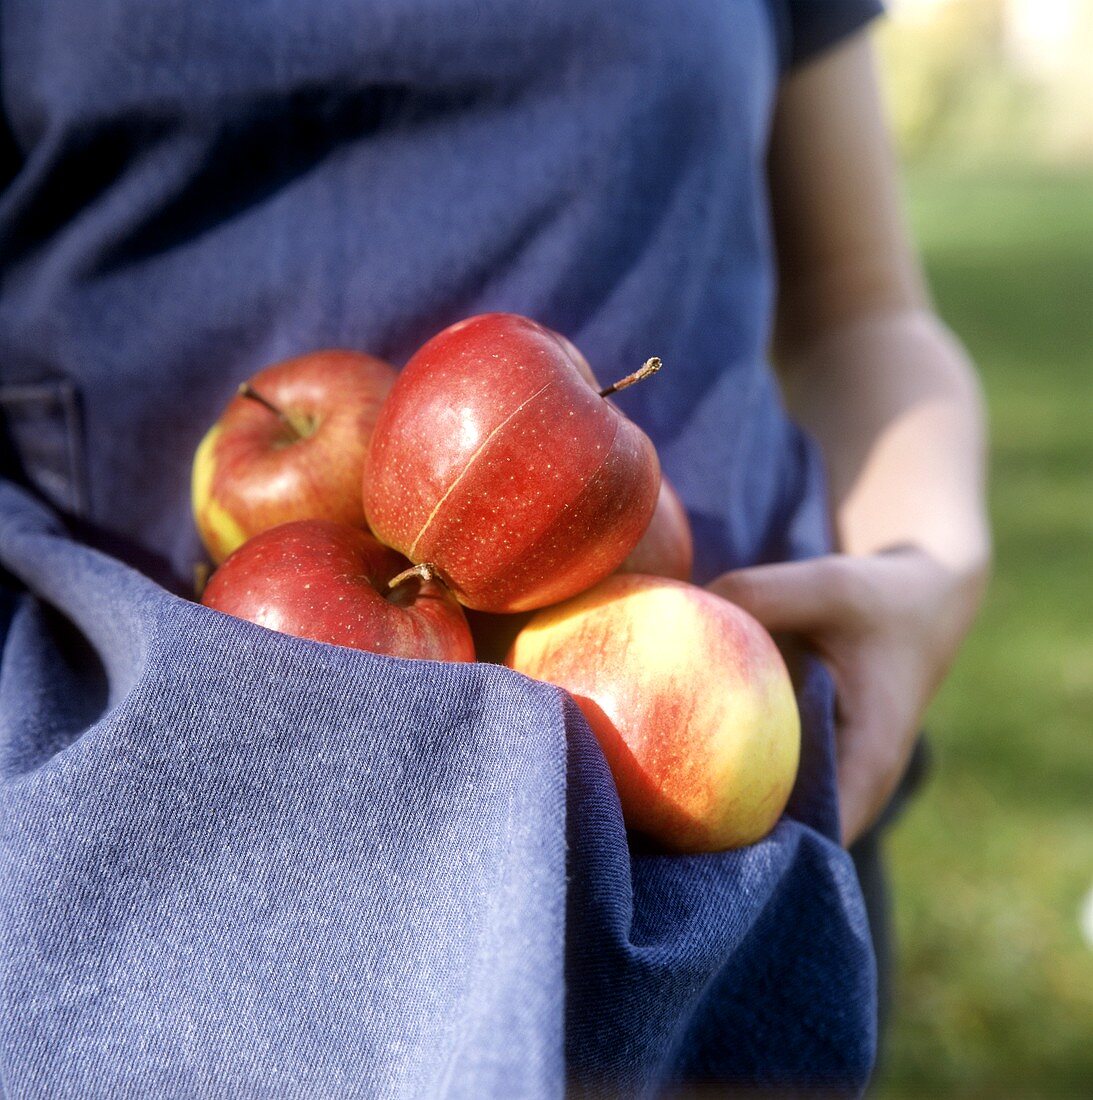 Freshly picked apples in an apron